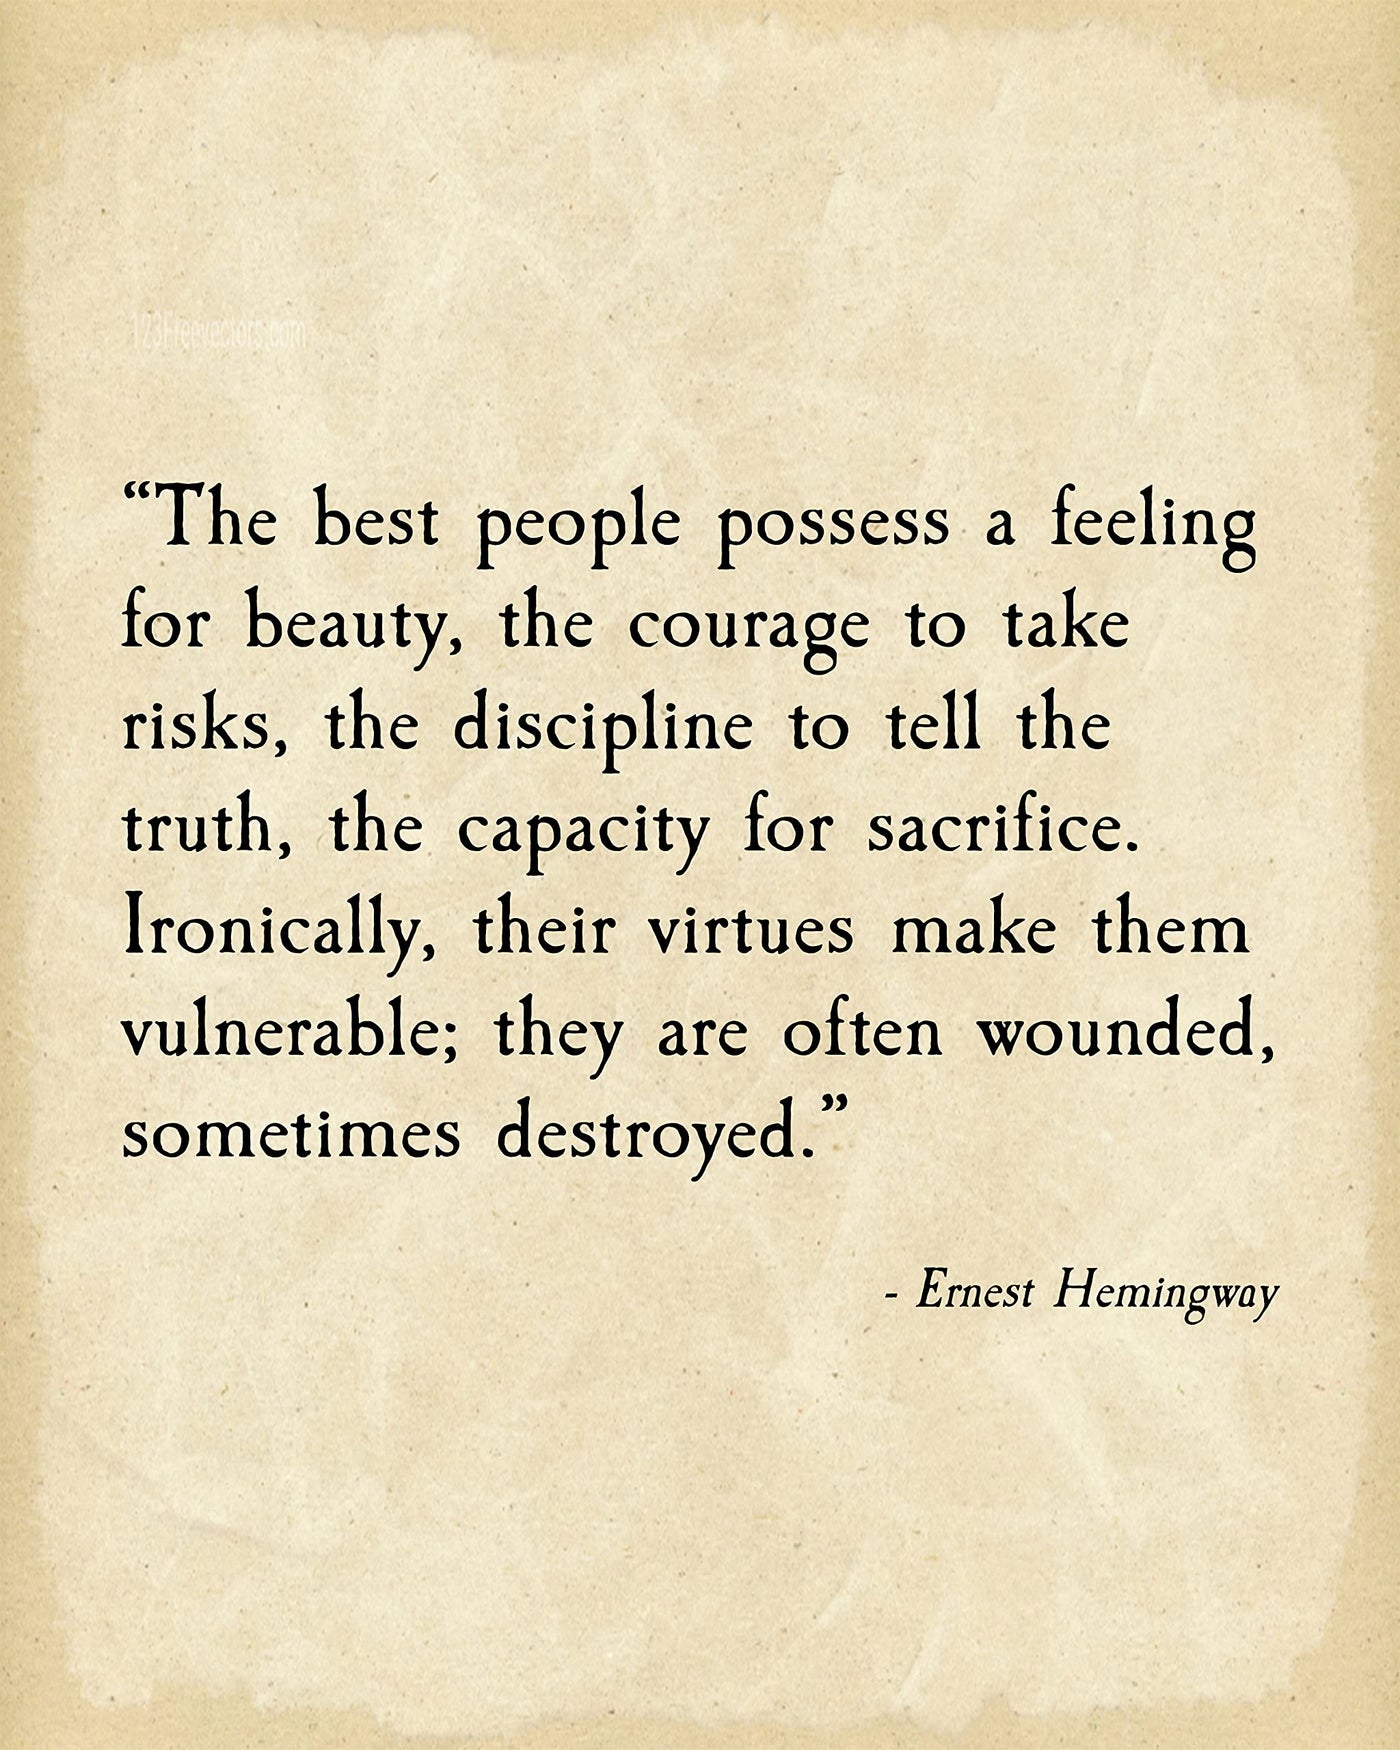 Ernest Hemingway Quotes-"The Best People" Inspirational Wall Art -8 x 10" Vintage Motivational Wall Print -Ready to Frame. Home-Office-School-Library Decor. Great Literary Gift for Book Lovers!